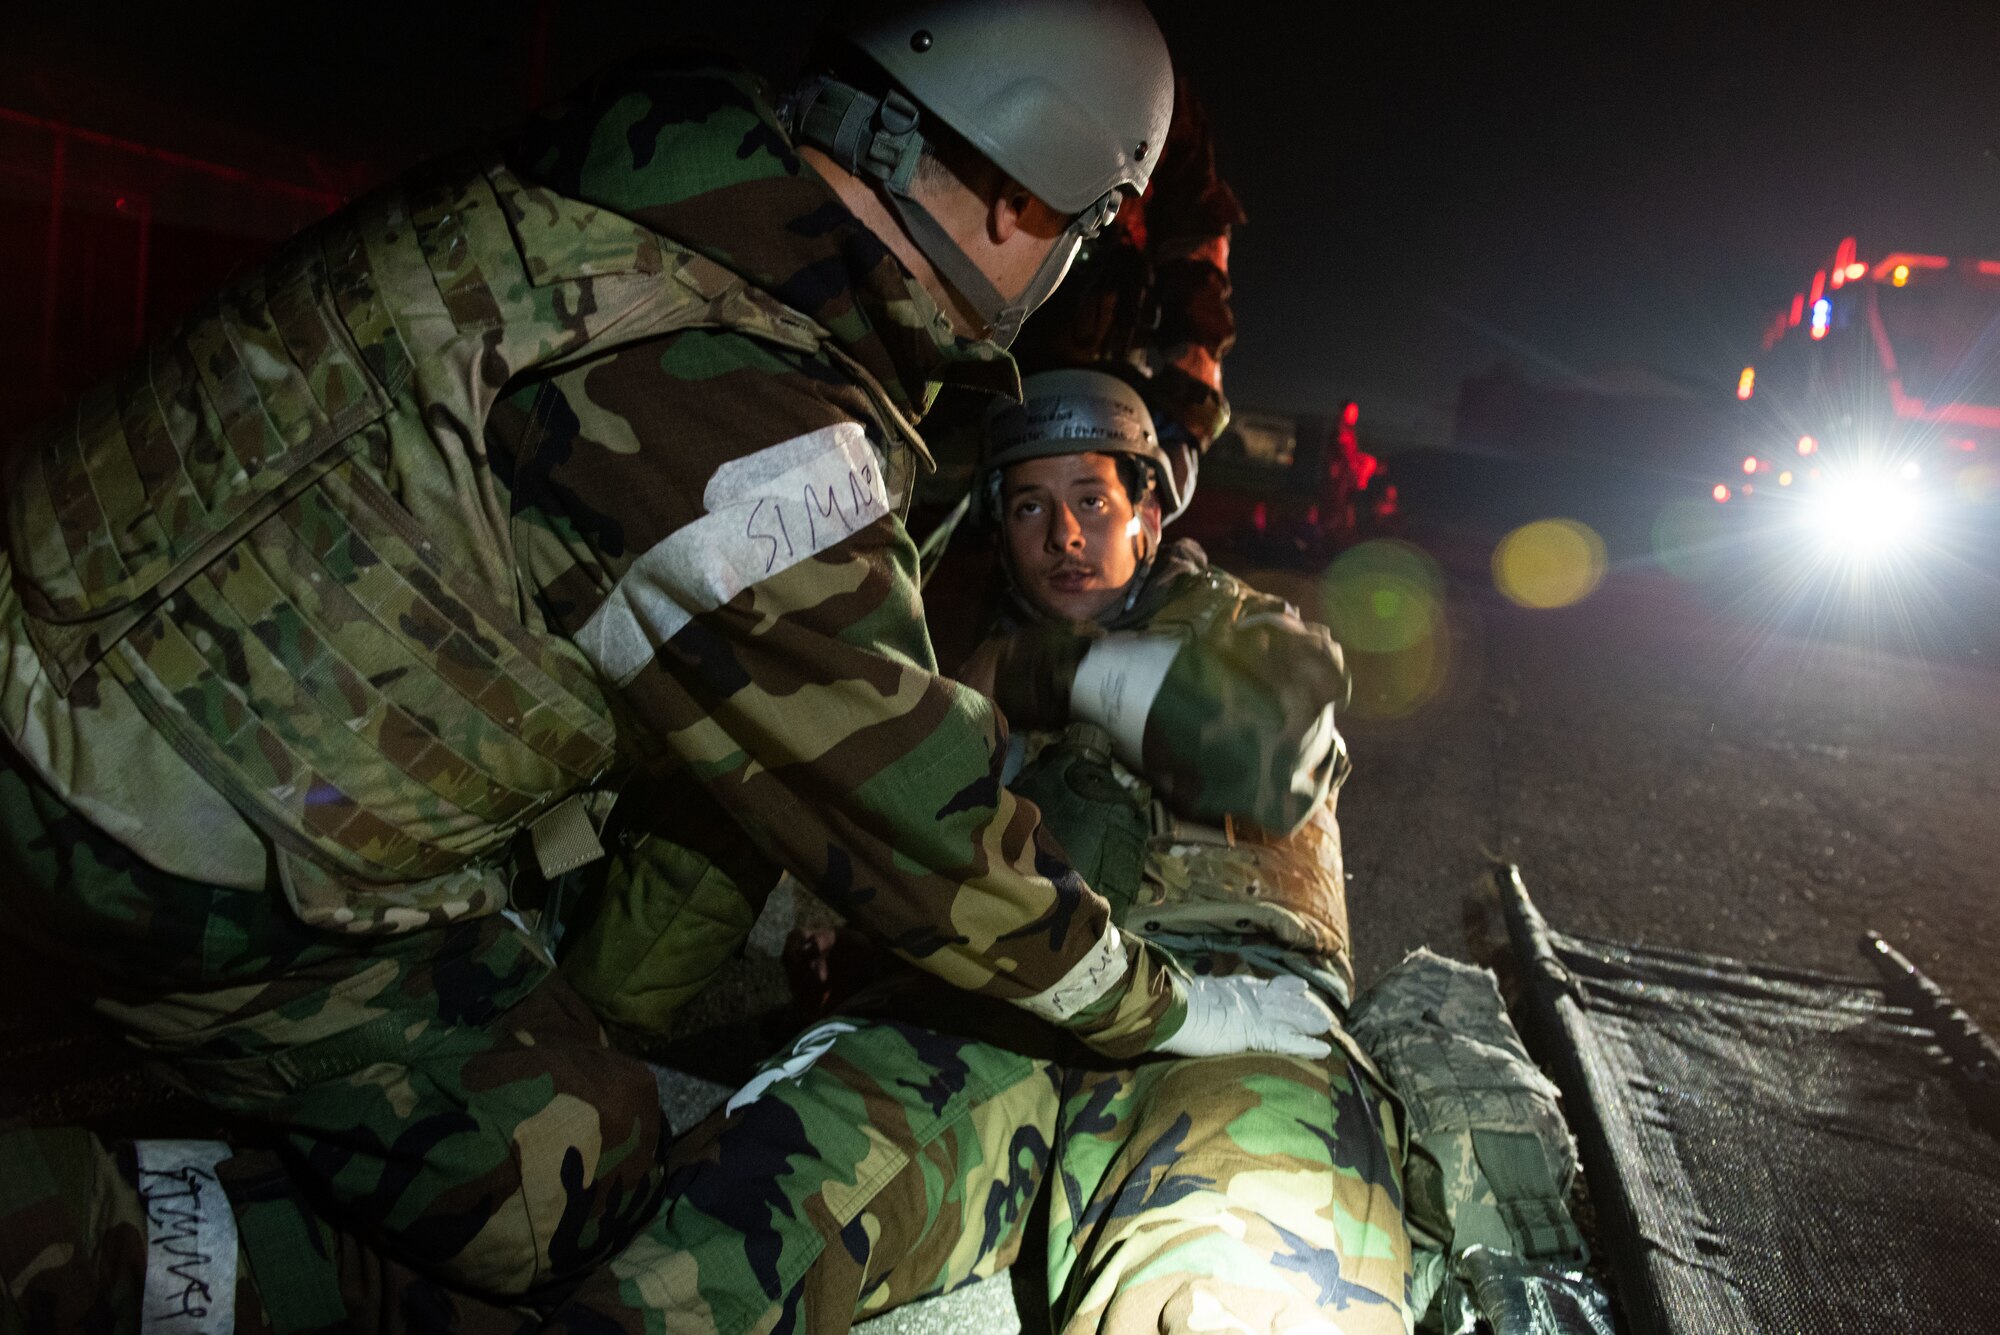 U.S. Air Force Airman Johnathan Rondon Cruz, 51st Civil Engineer Squadron firefighter, receives medical attention from a field response team member during a fire response scenario at Osan Air Base, Republic of Korea, Sept. 12, 2022, in support of a wing training event.